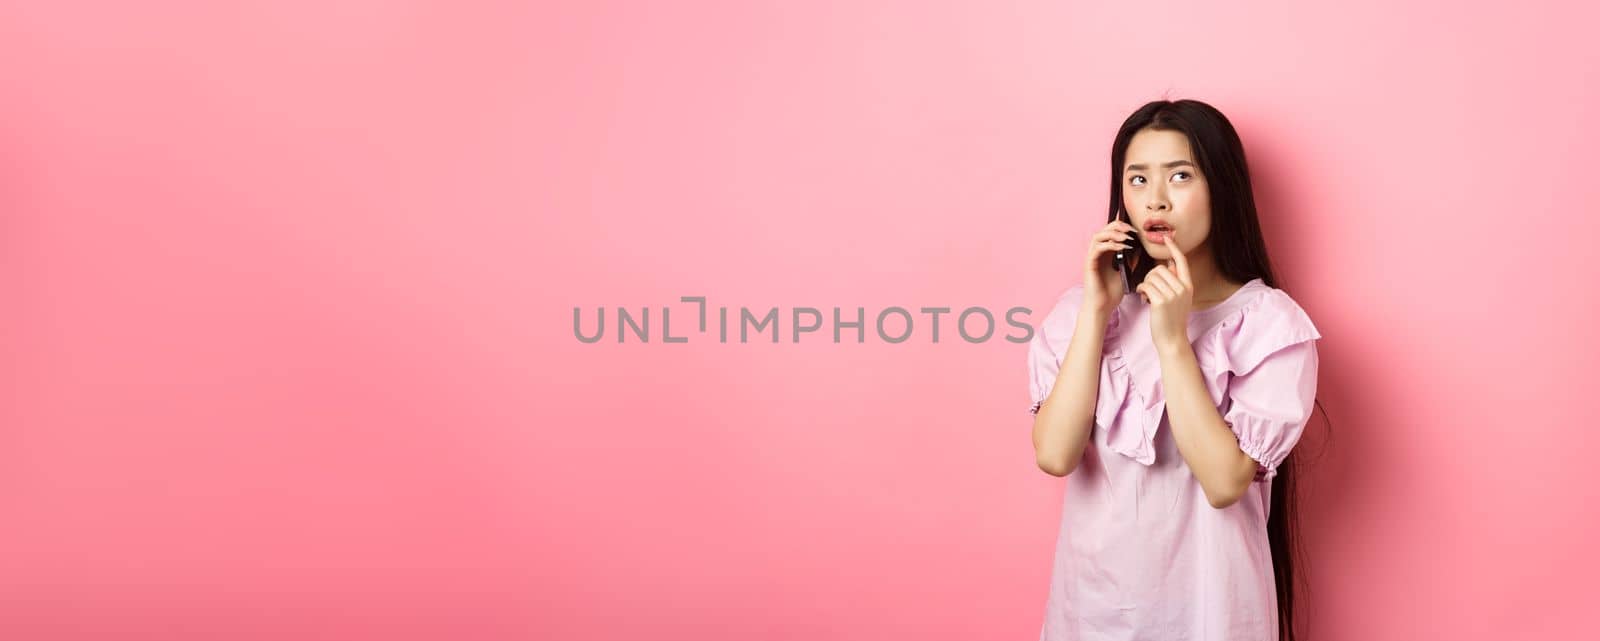 Thoughtful asian woman talking on mobile phone and thinking, touching lip and look up pensive, standing against pink background.